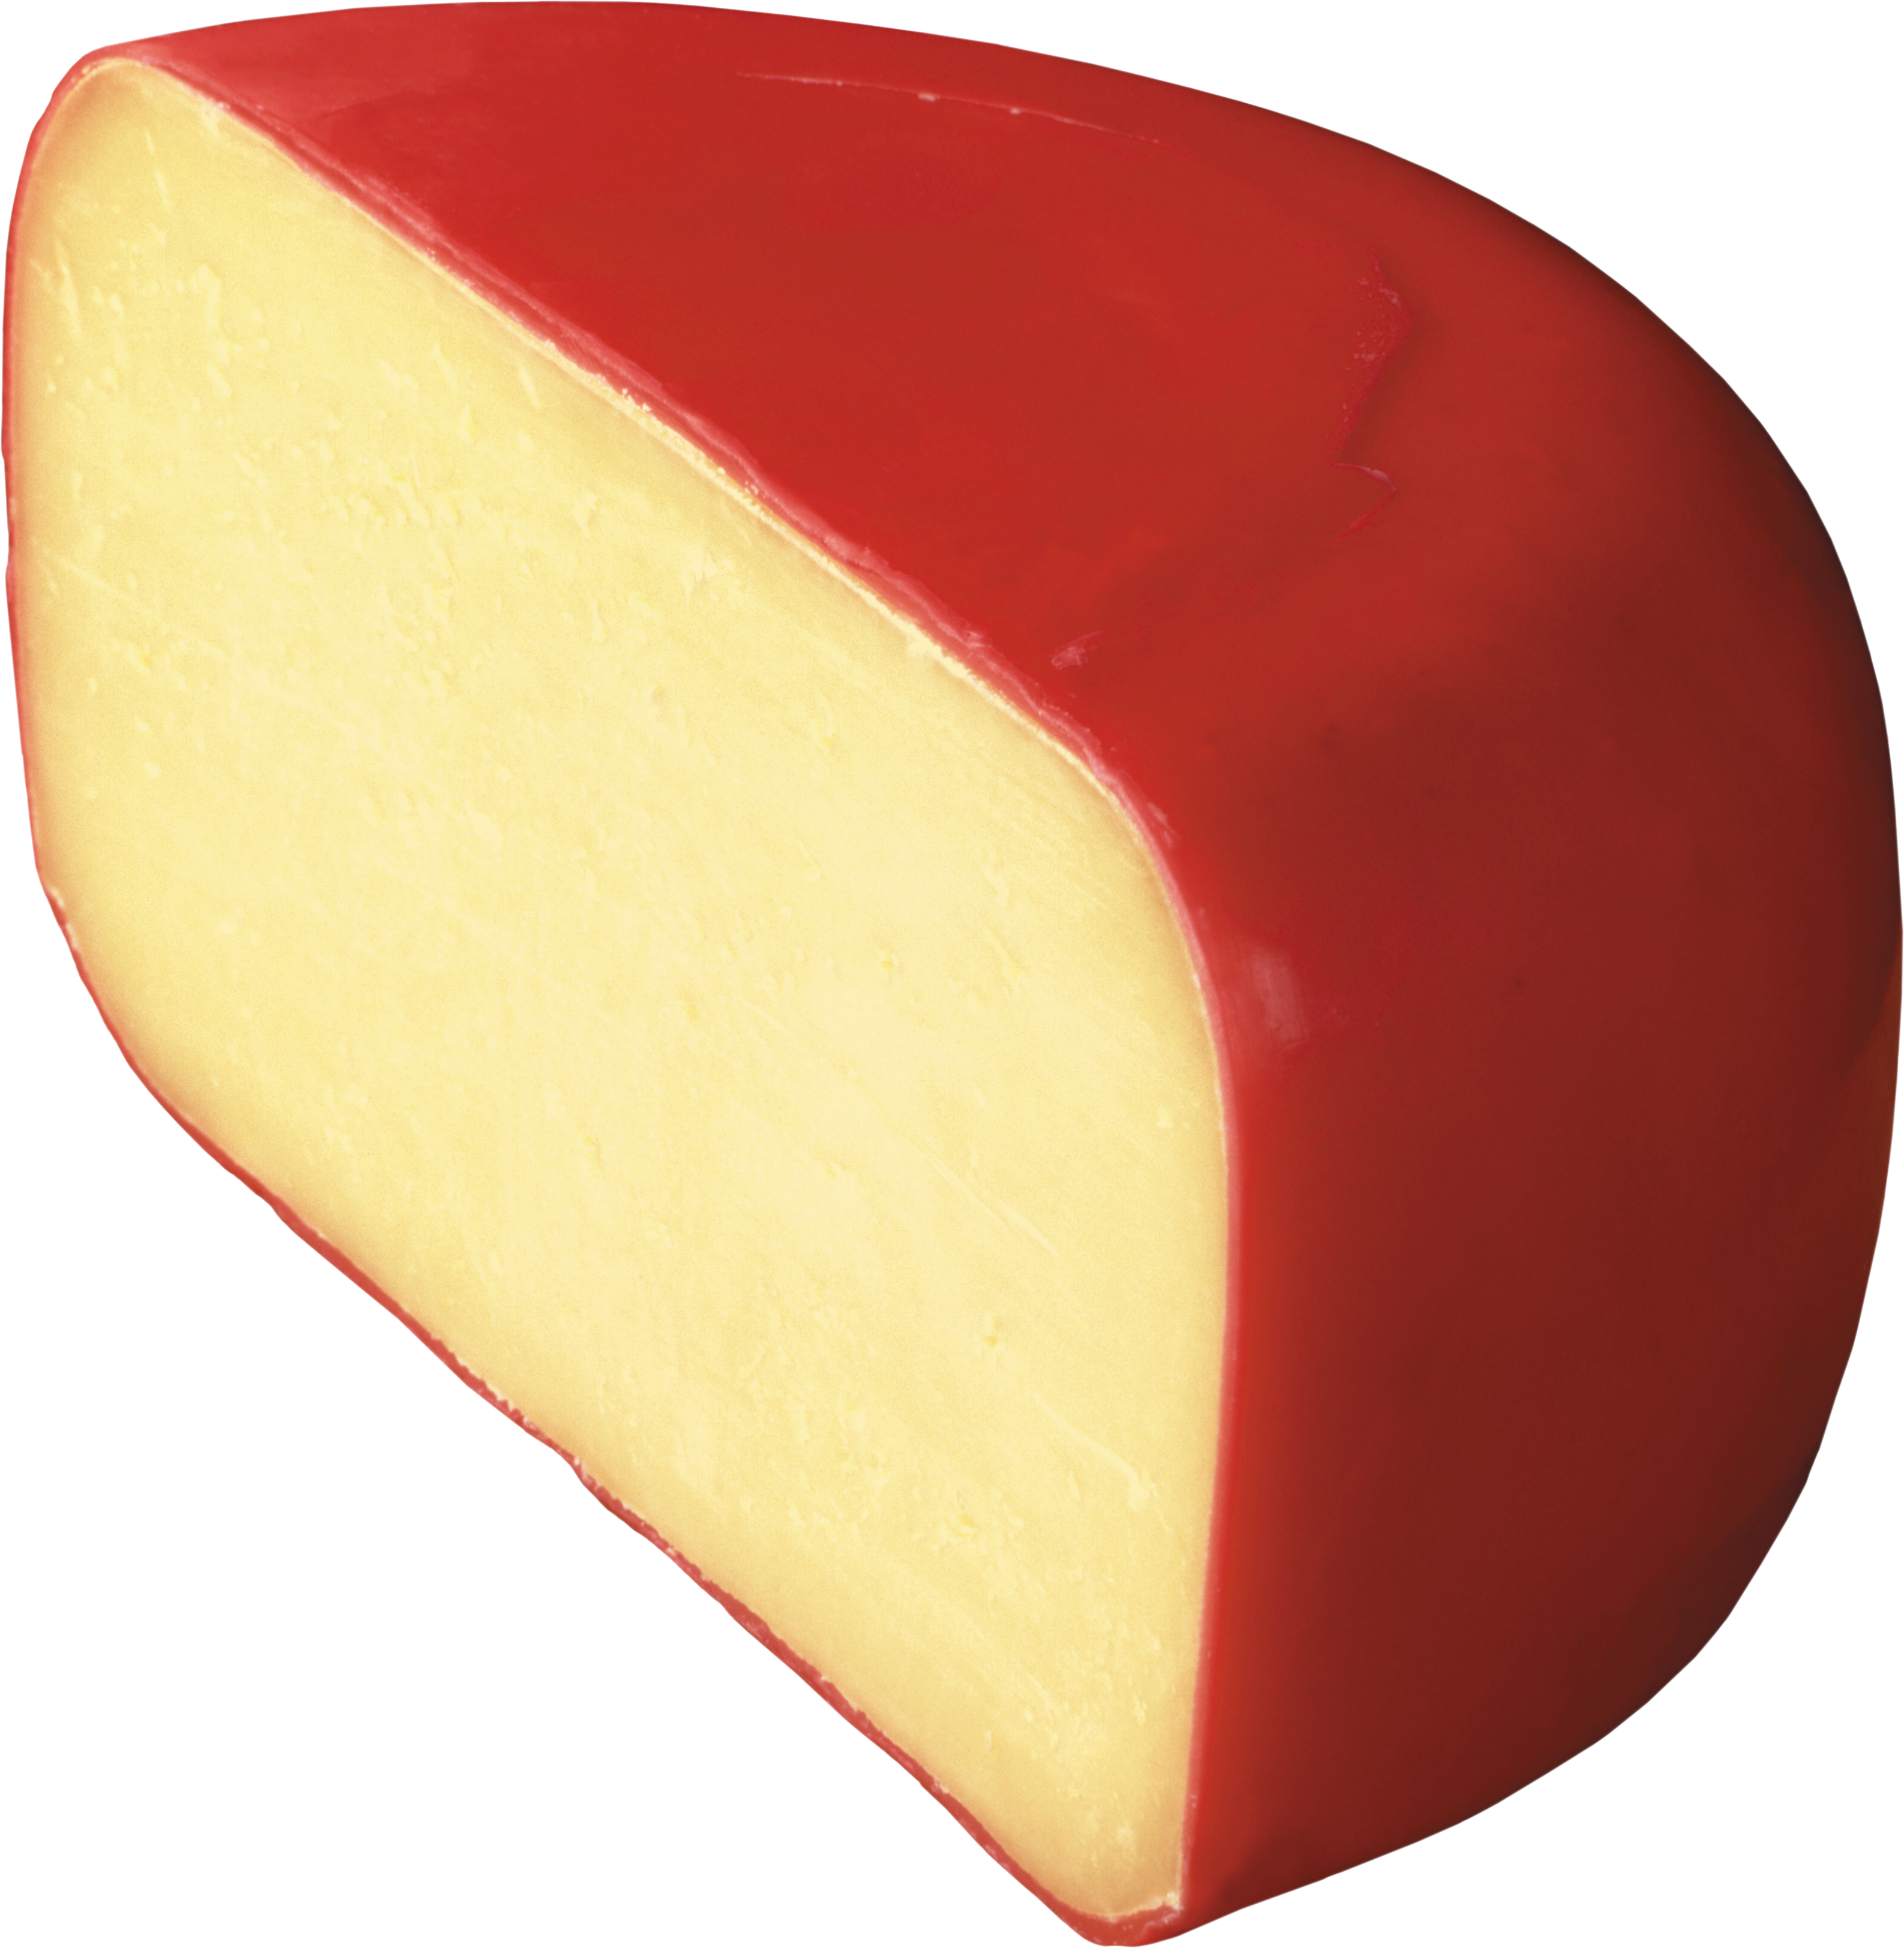 Cheese Png Images Free Cheese Images Download Rh Pngimg - Cheese Png (3174x3248)